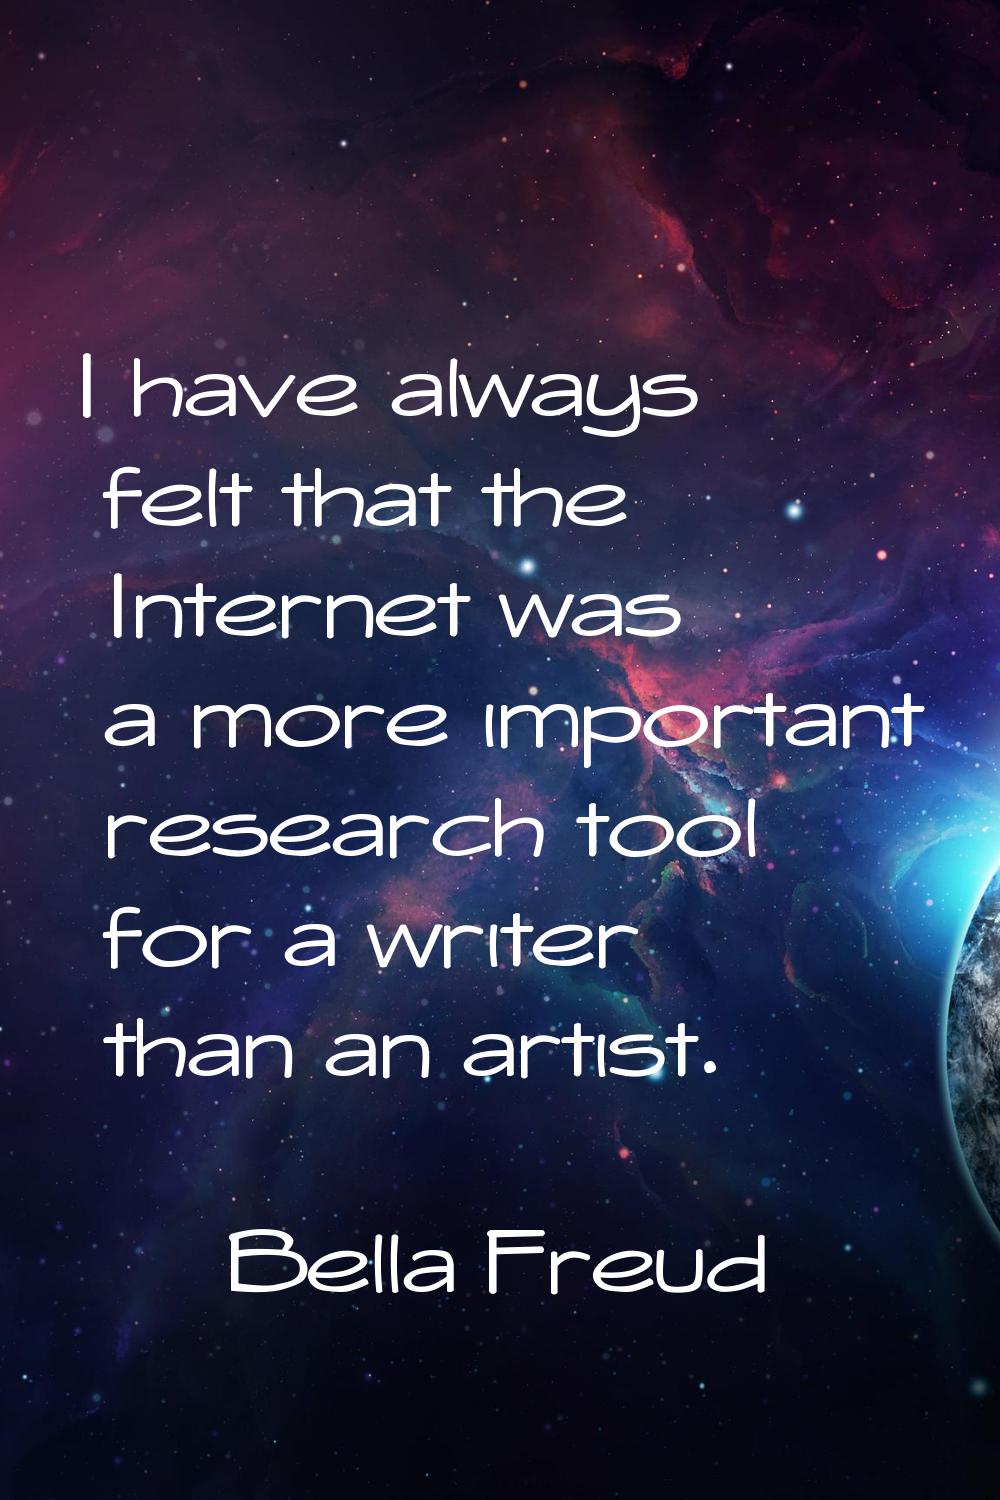 I have always felt that the Internet was a more important research tool for a writer than an artist